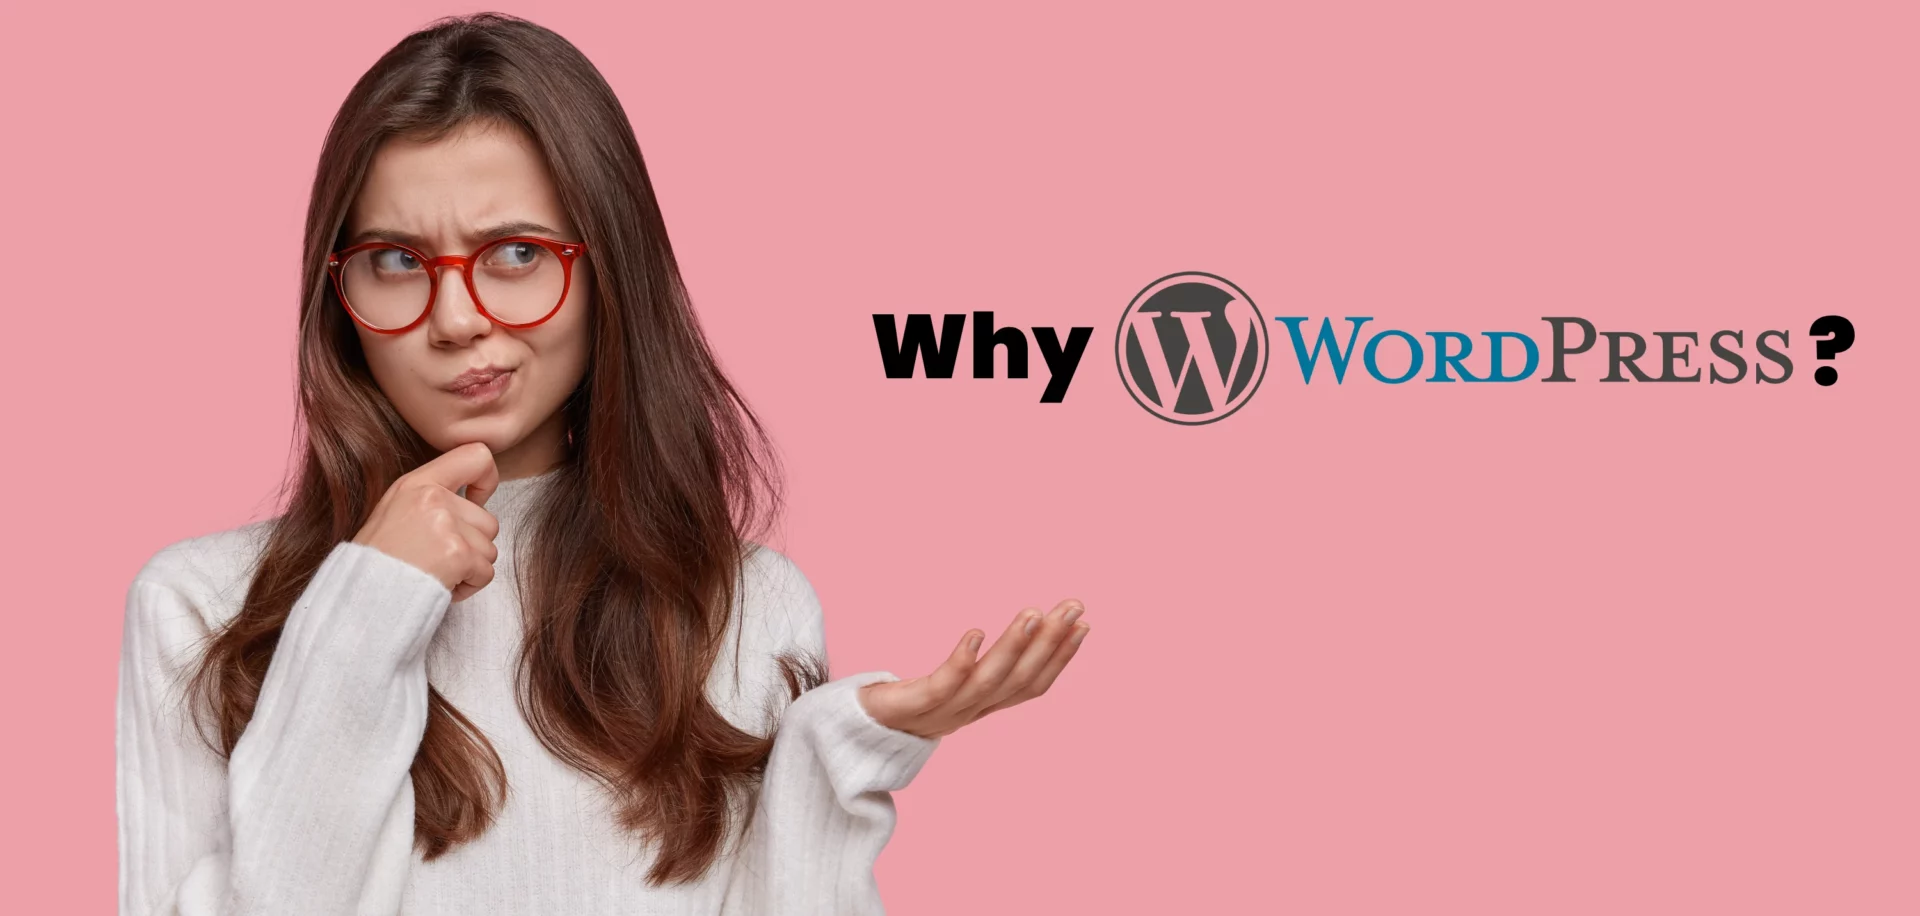 7 Reasons to use WordPress for your website